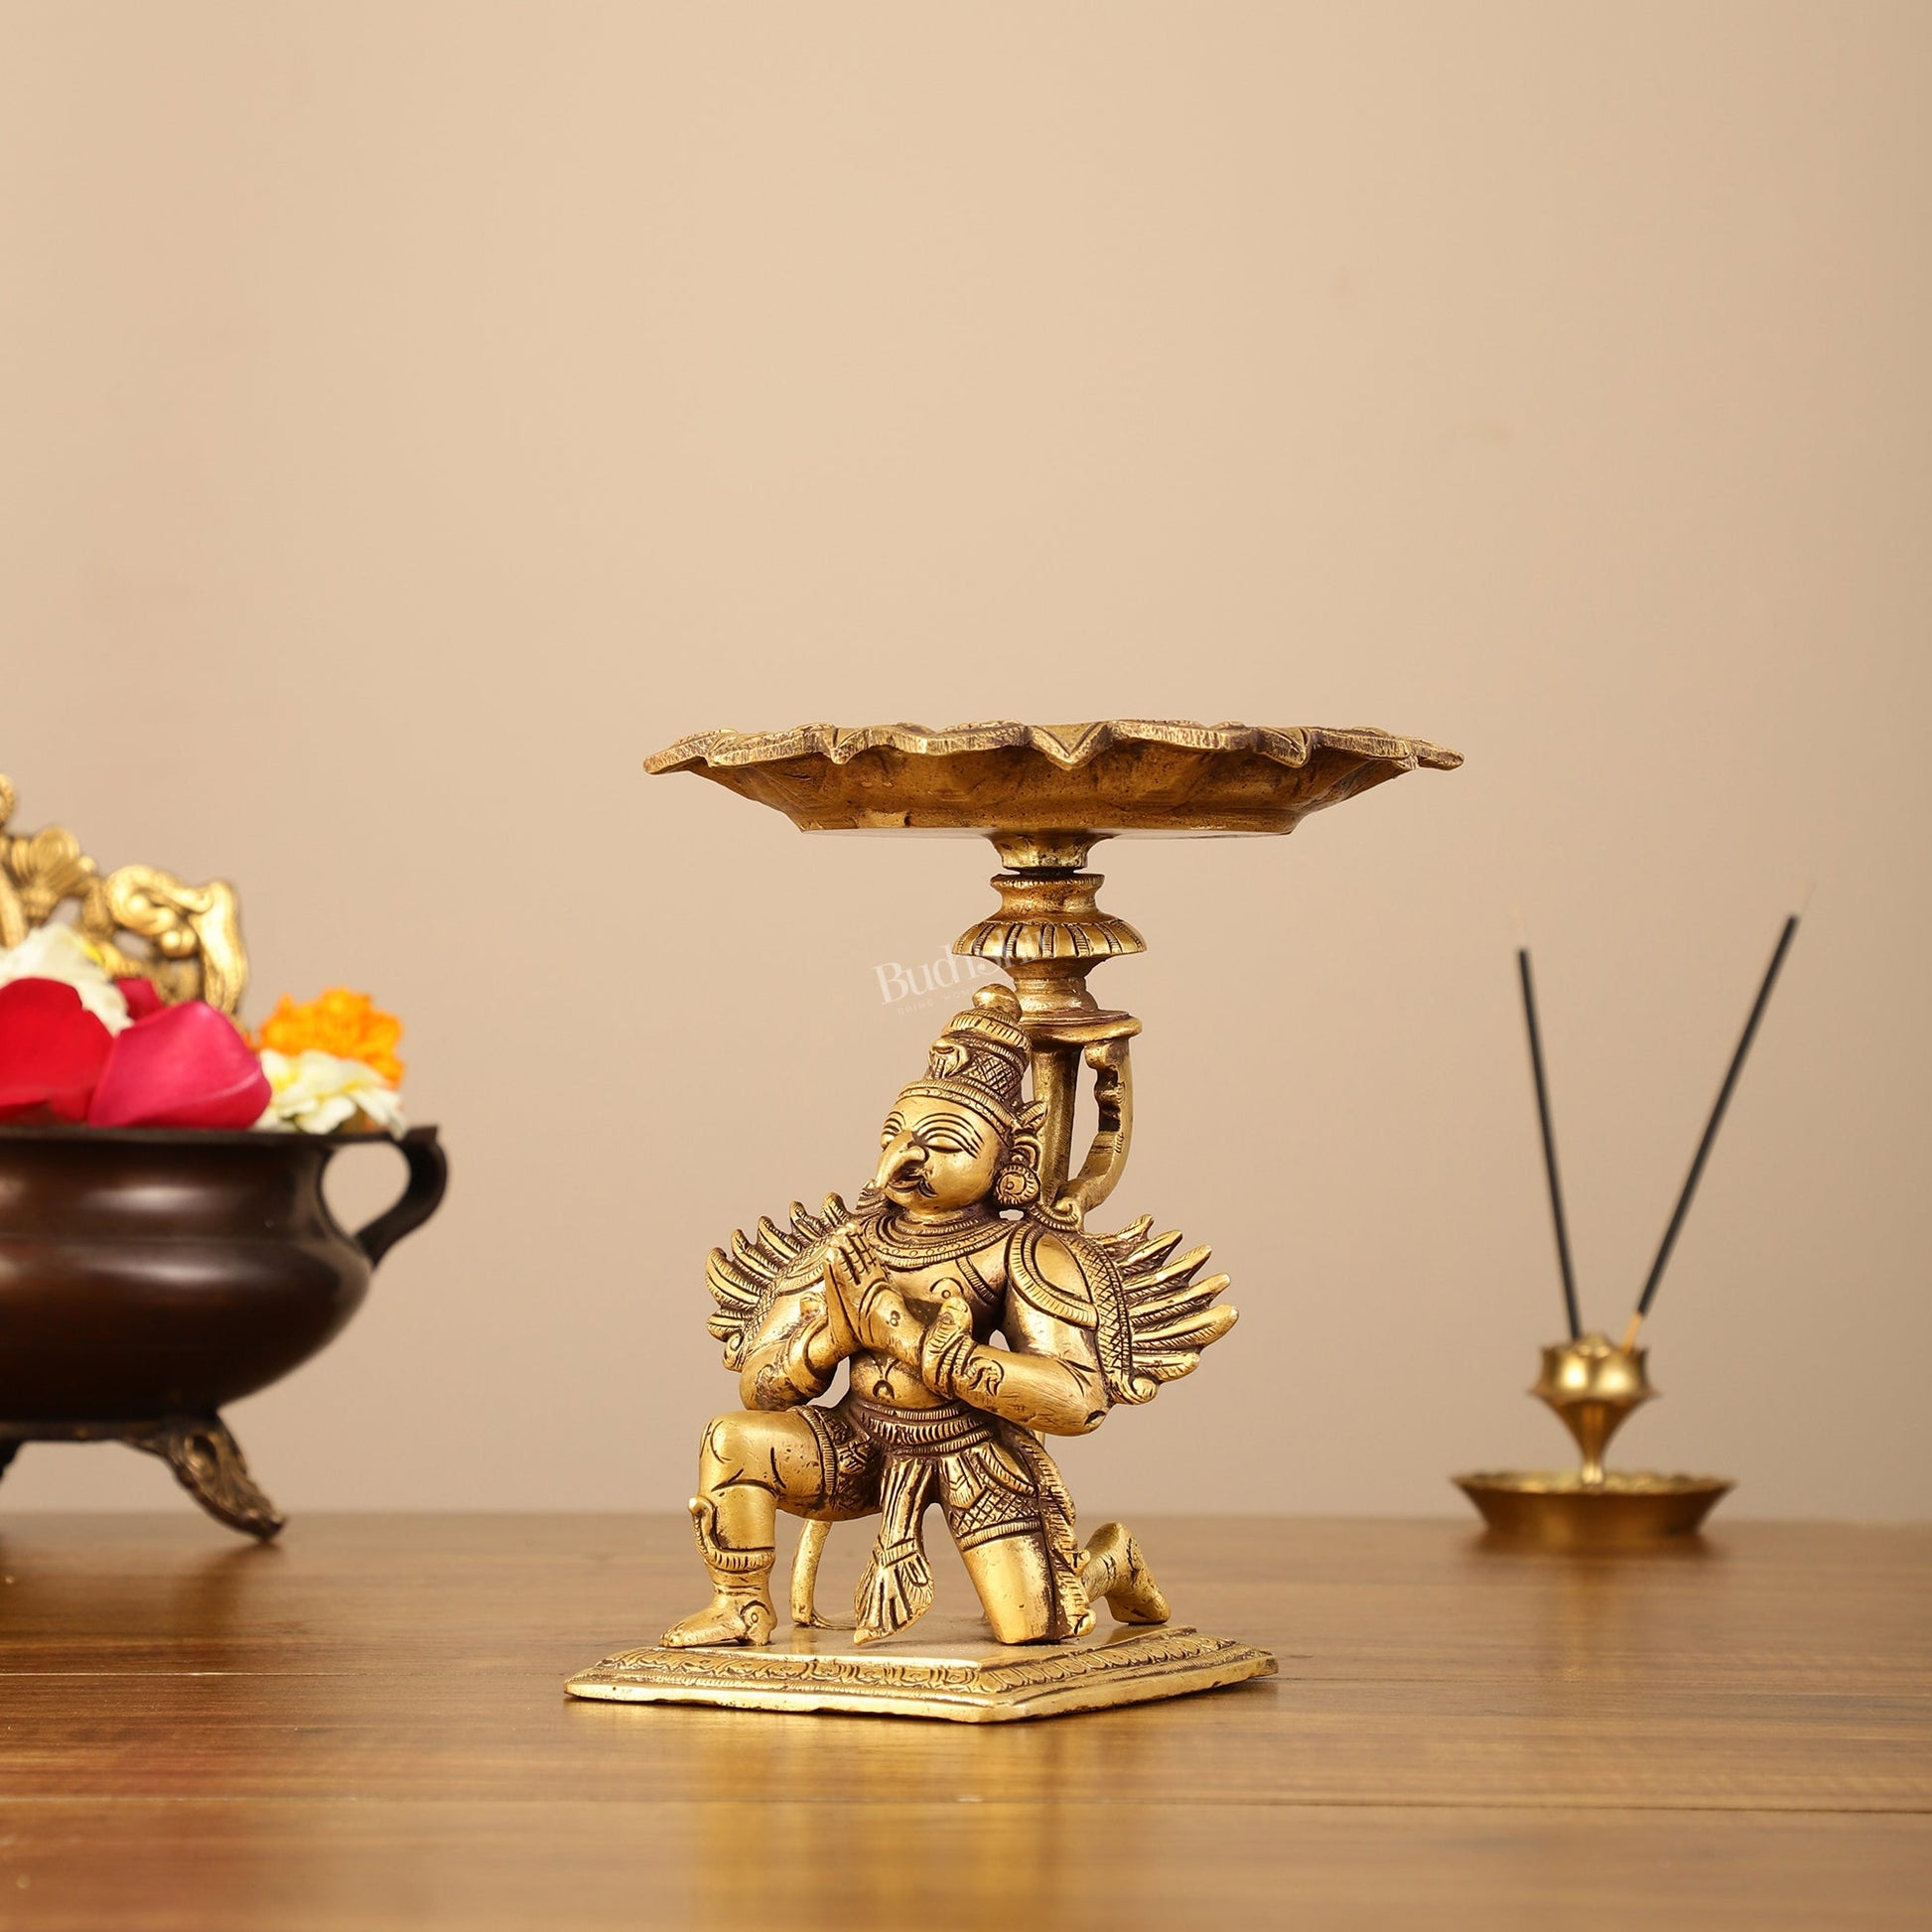 Superfine Brass Garuda Lamp - Traditional and Contemporary Candle Holder 6.5" - Budhshiv.com